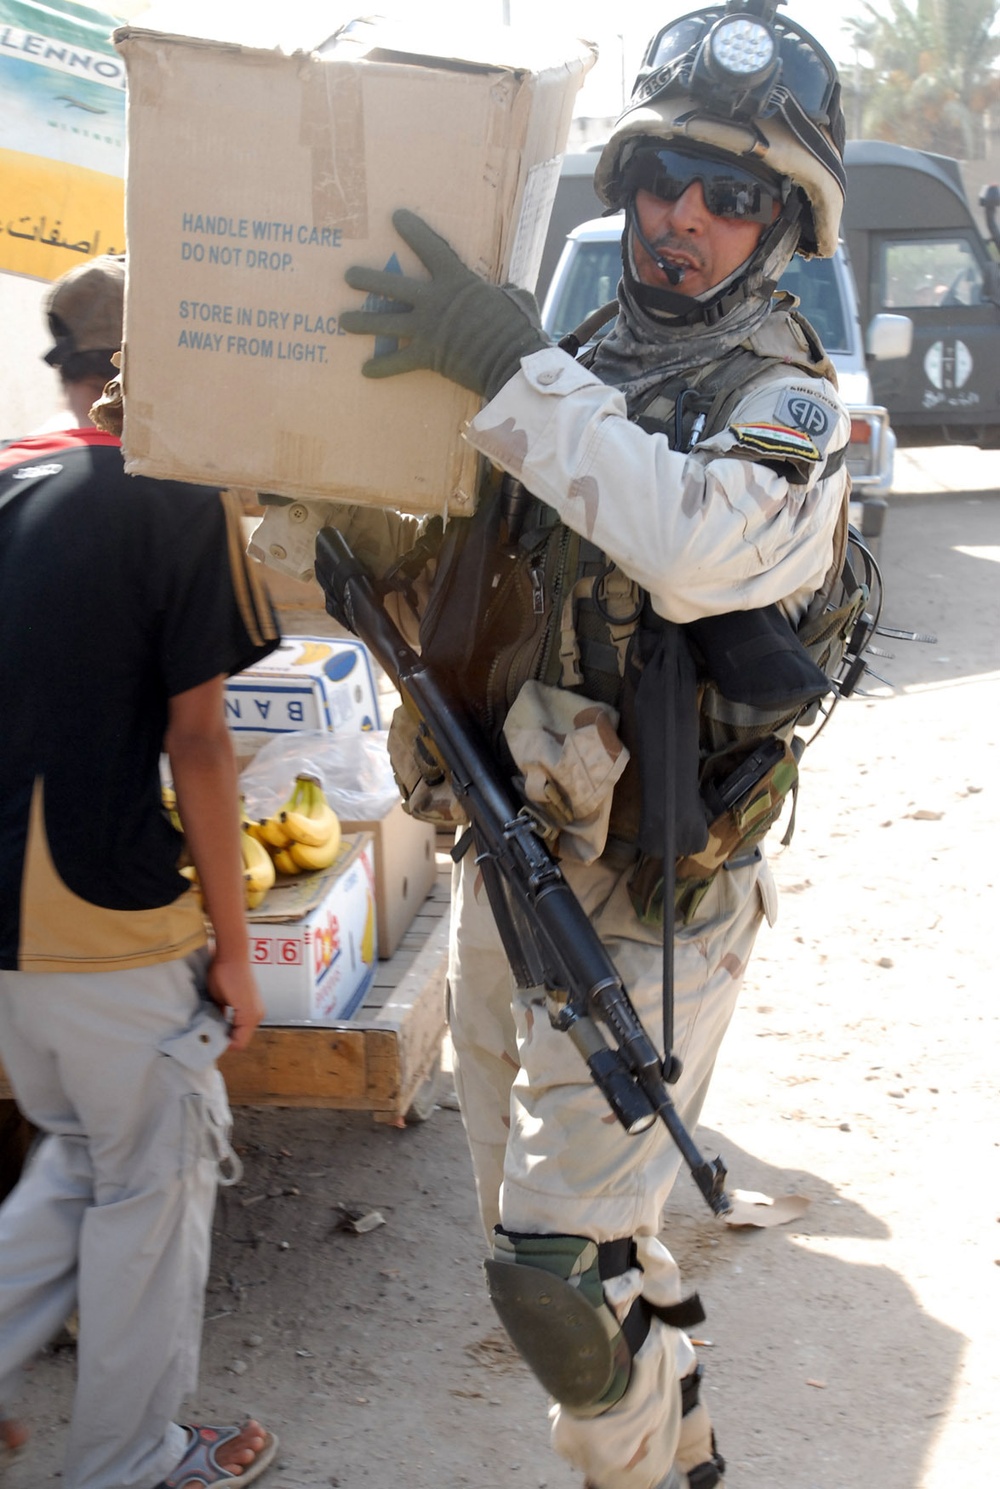 Iraqi army takes lead to support Sadr City clinic - Medical personnel deliver supplies, treat patients